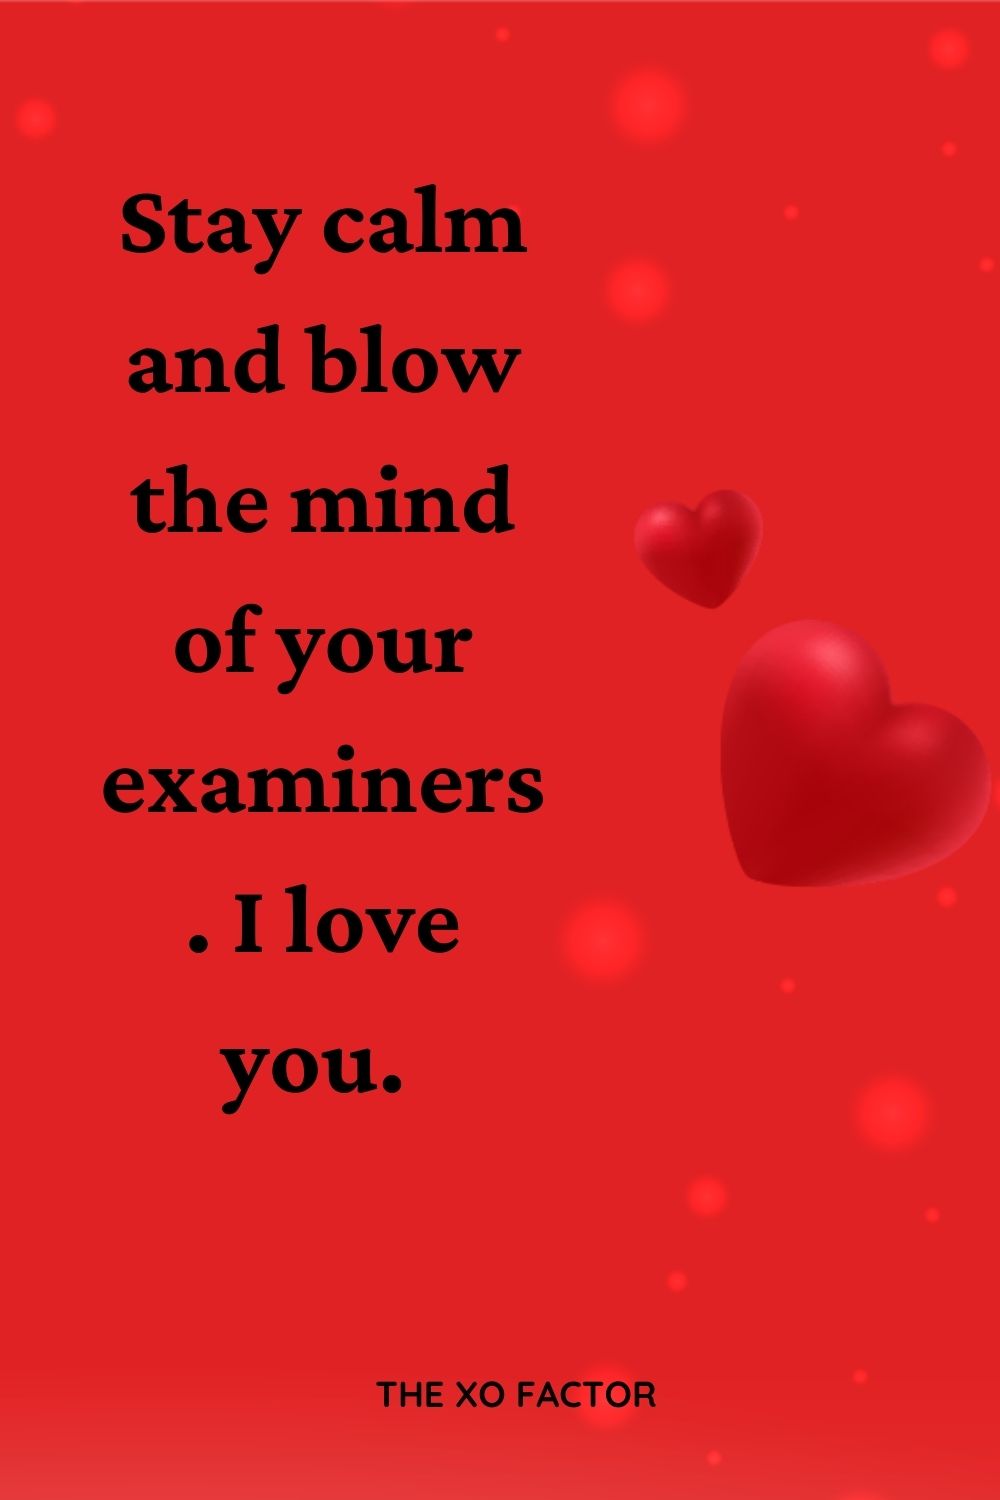  Stay calm and blow the mind of your examiners. I love you. 